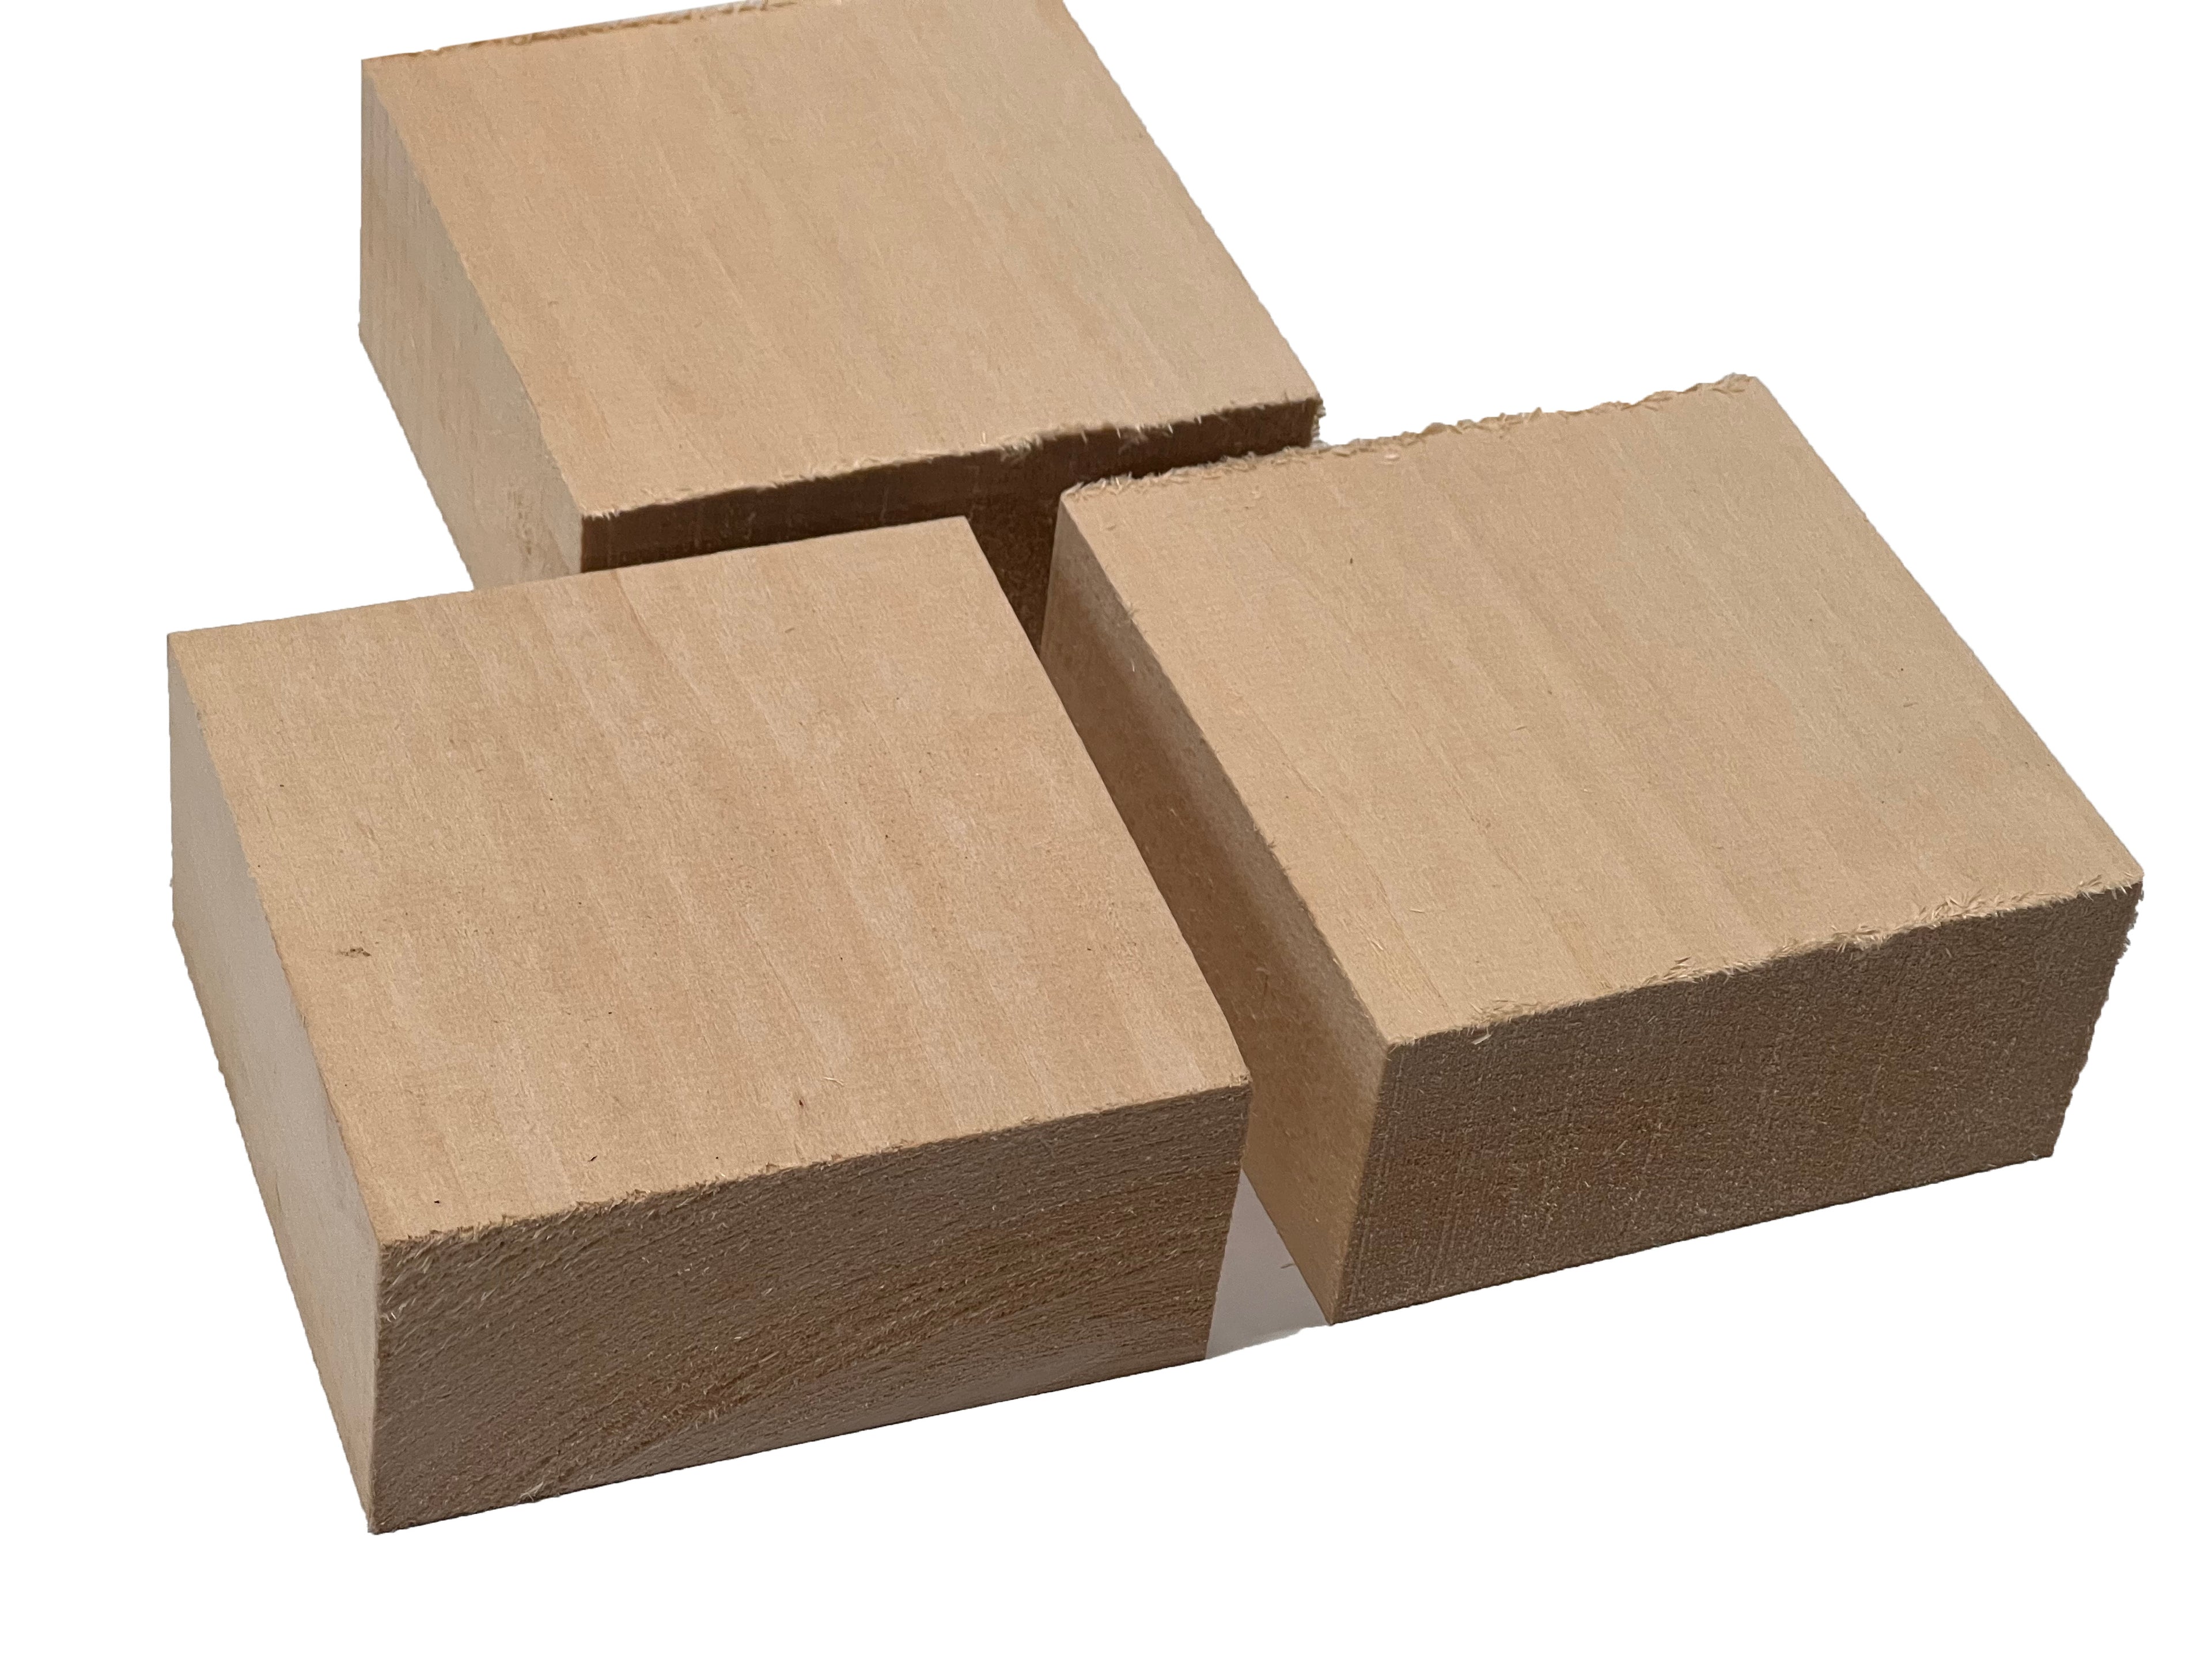 Set of 3, Basswood Carving Wood Blocks/Bowl Blanks Kit 4&quot; x 4&quot; x 2&quot; - Exotic Wood Zone - Buy online Across USA 